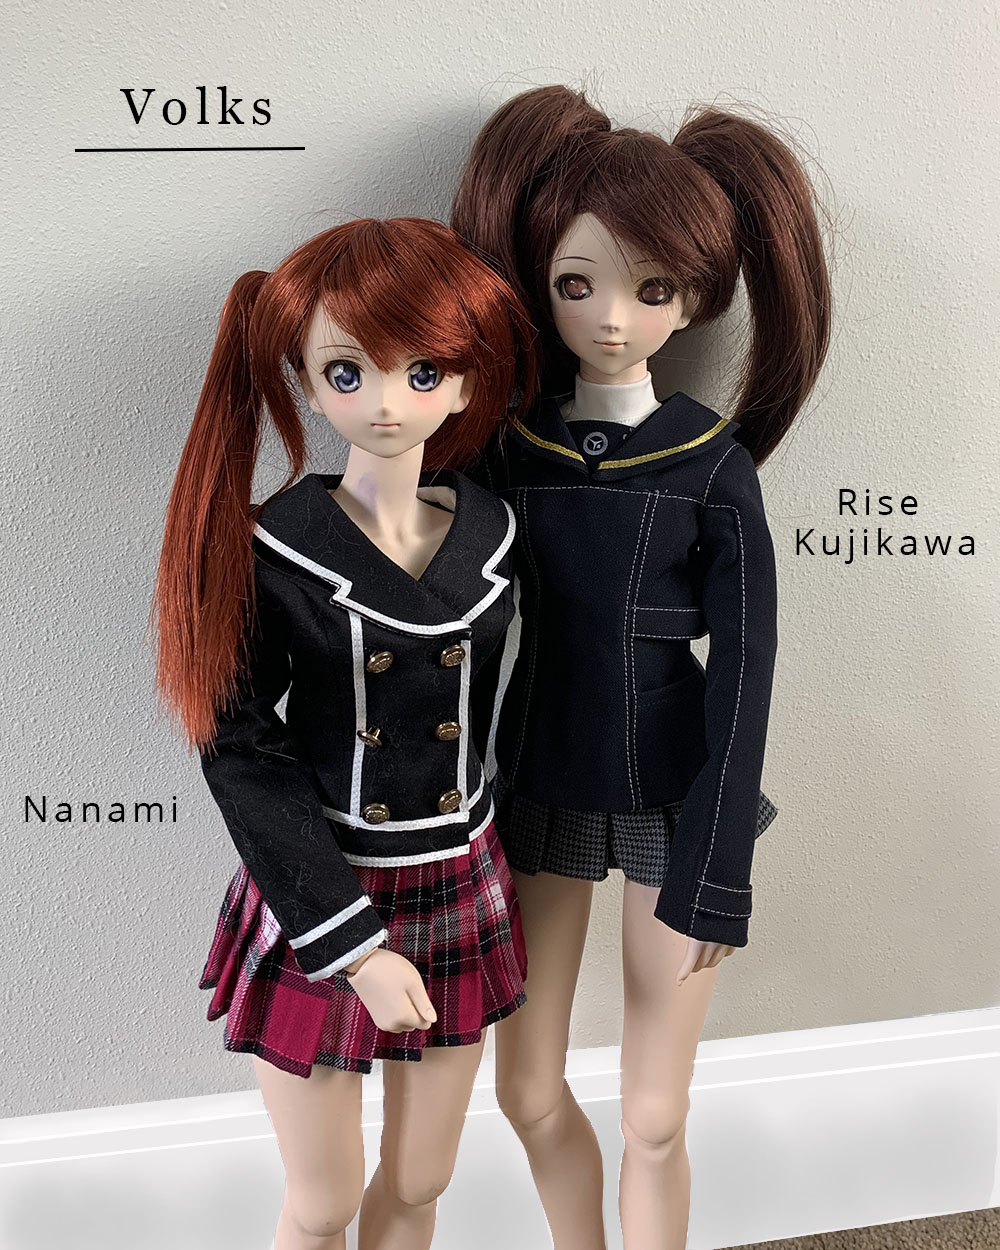 Volks doll clothes are well made and often lines.